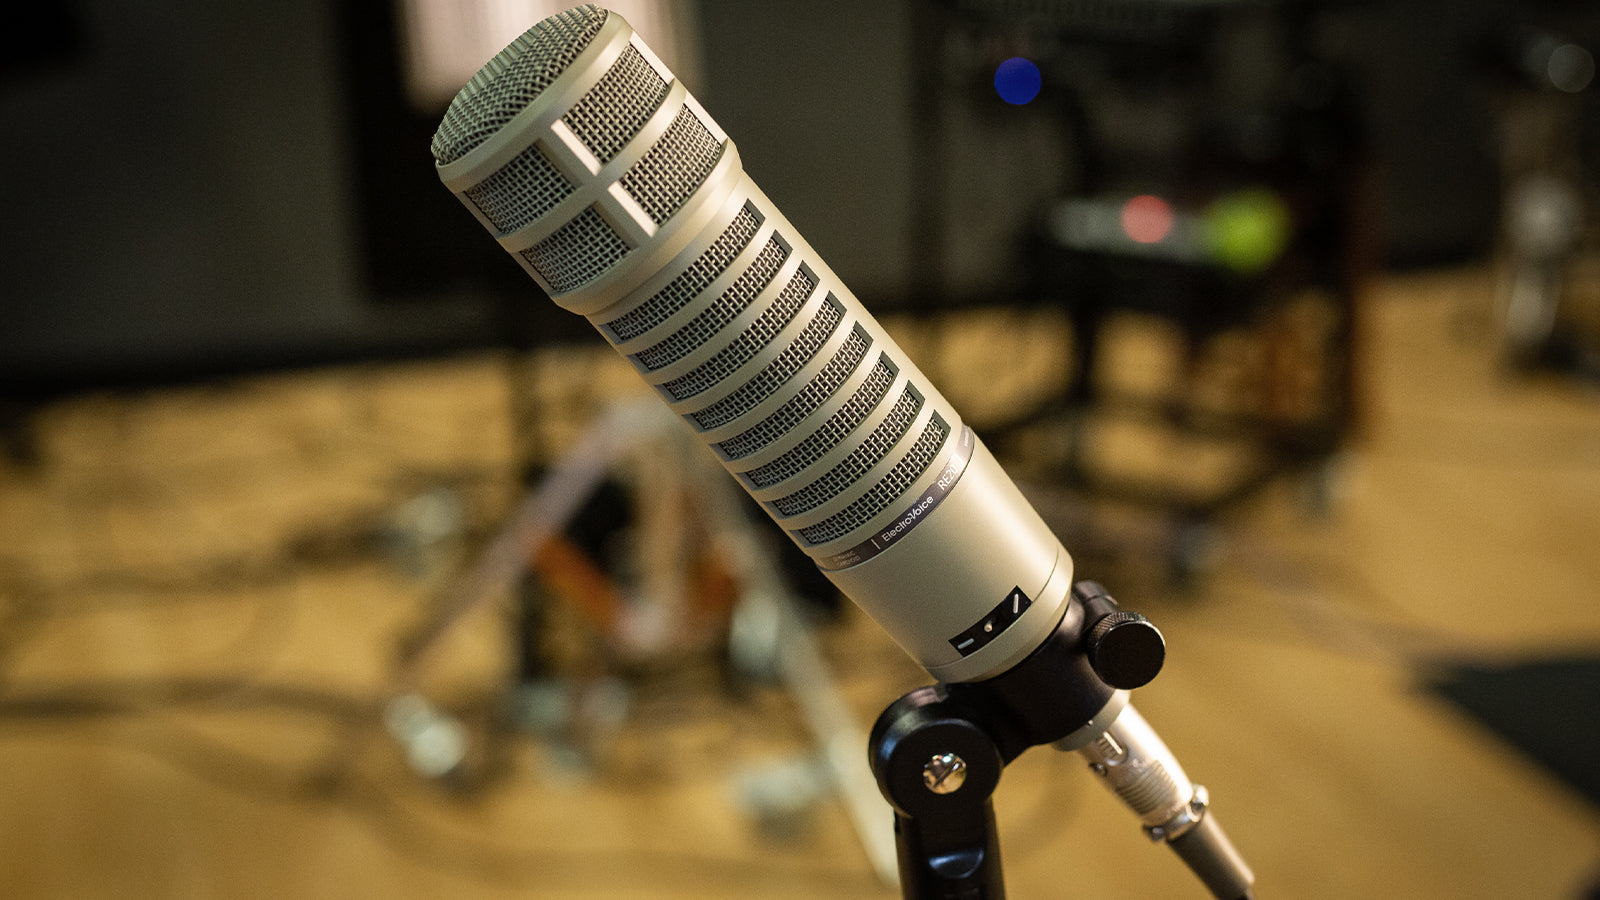 An Electro-Voice microphone on a stand in a studio